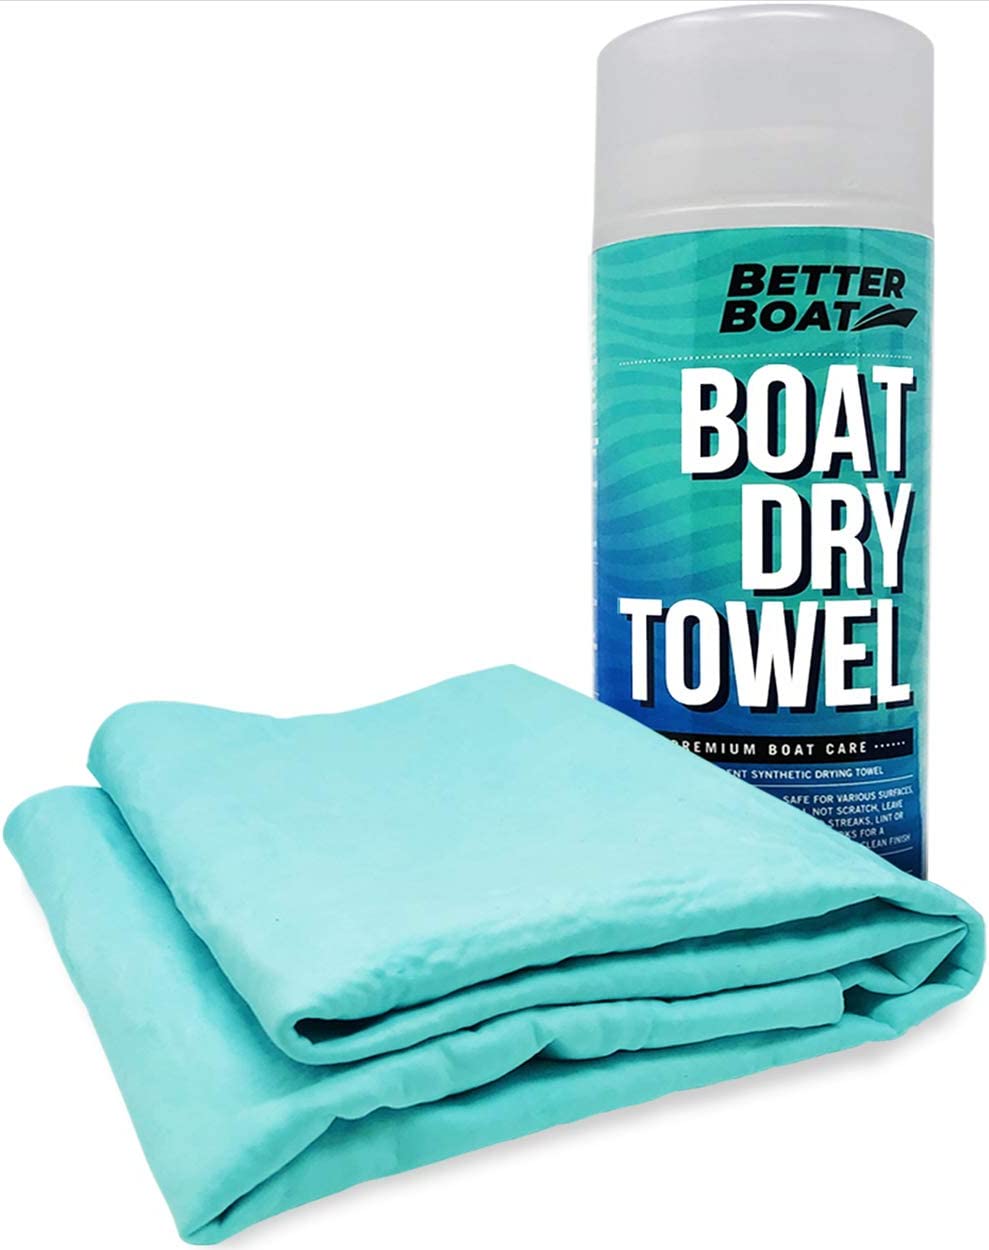 Ready to Set Sail? Check out These Must-Have Boat Gifts for Dad!